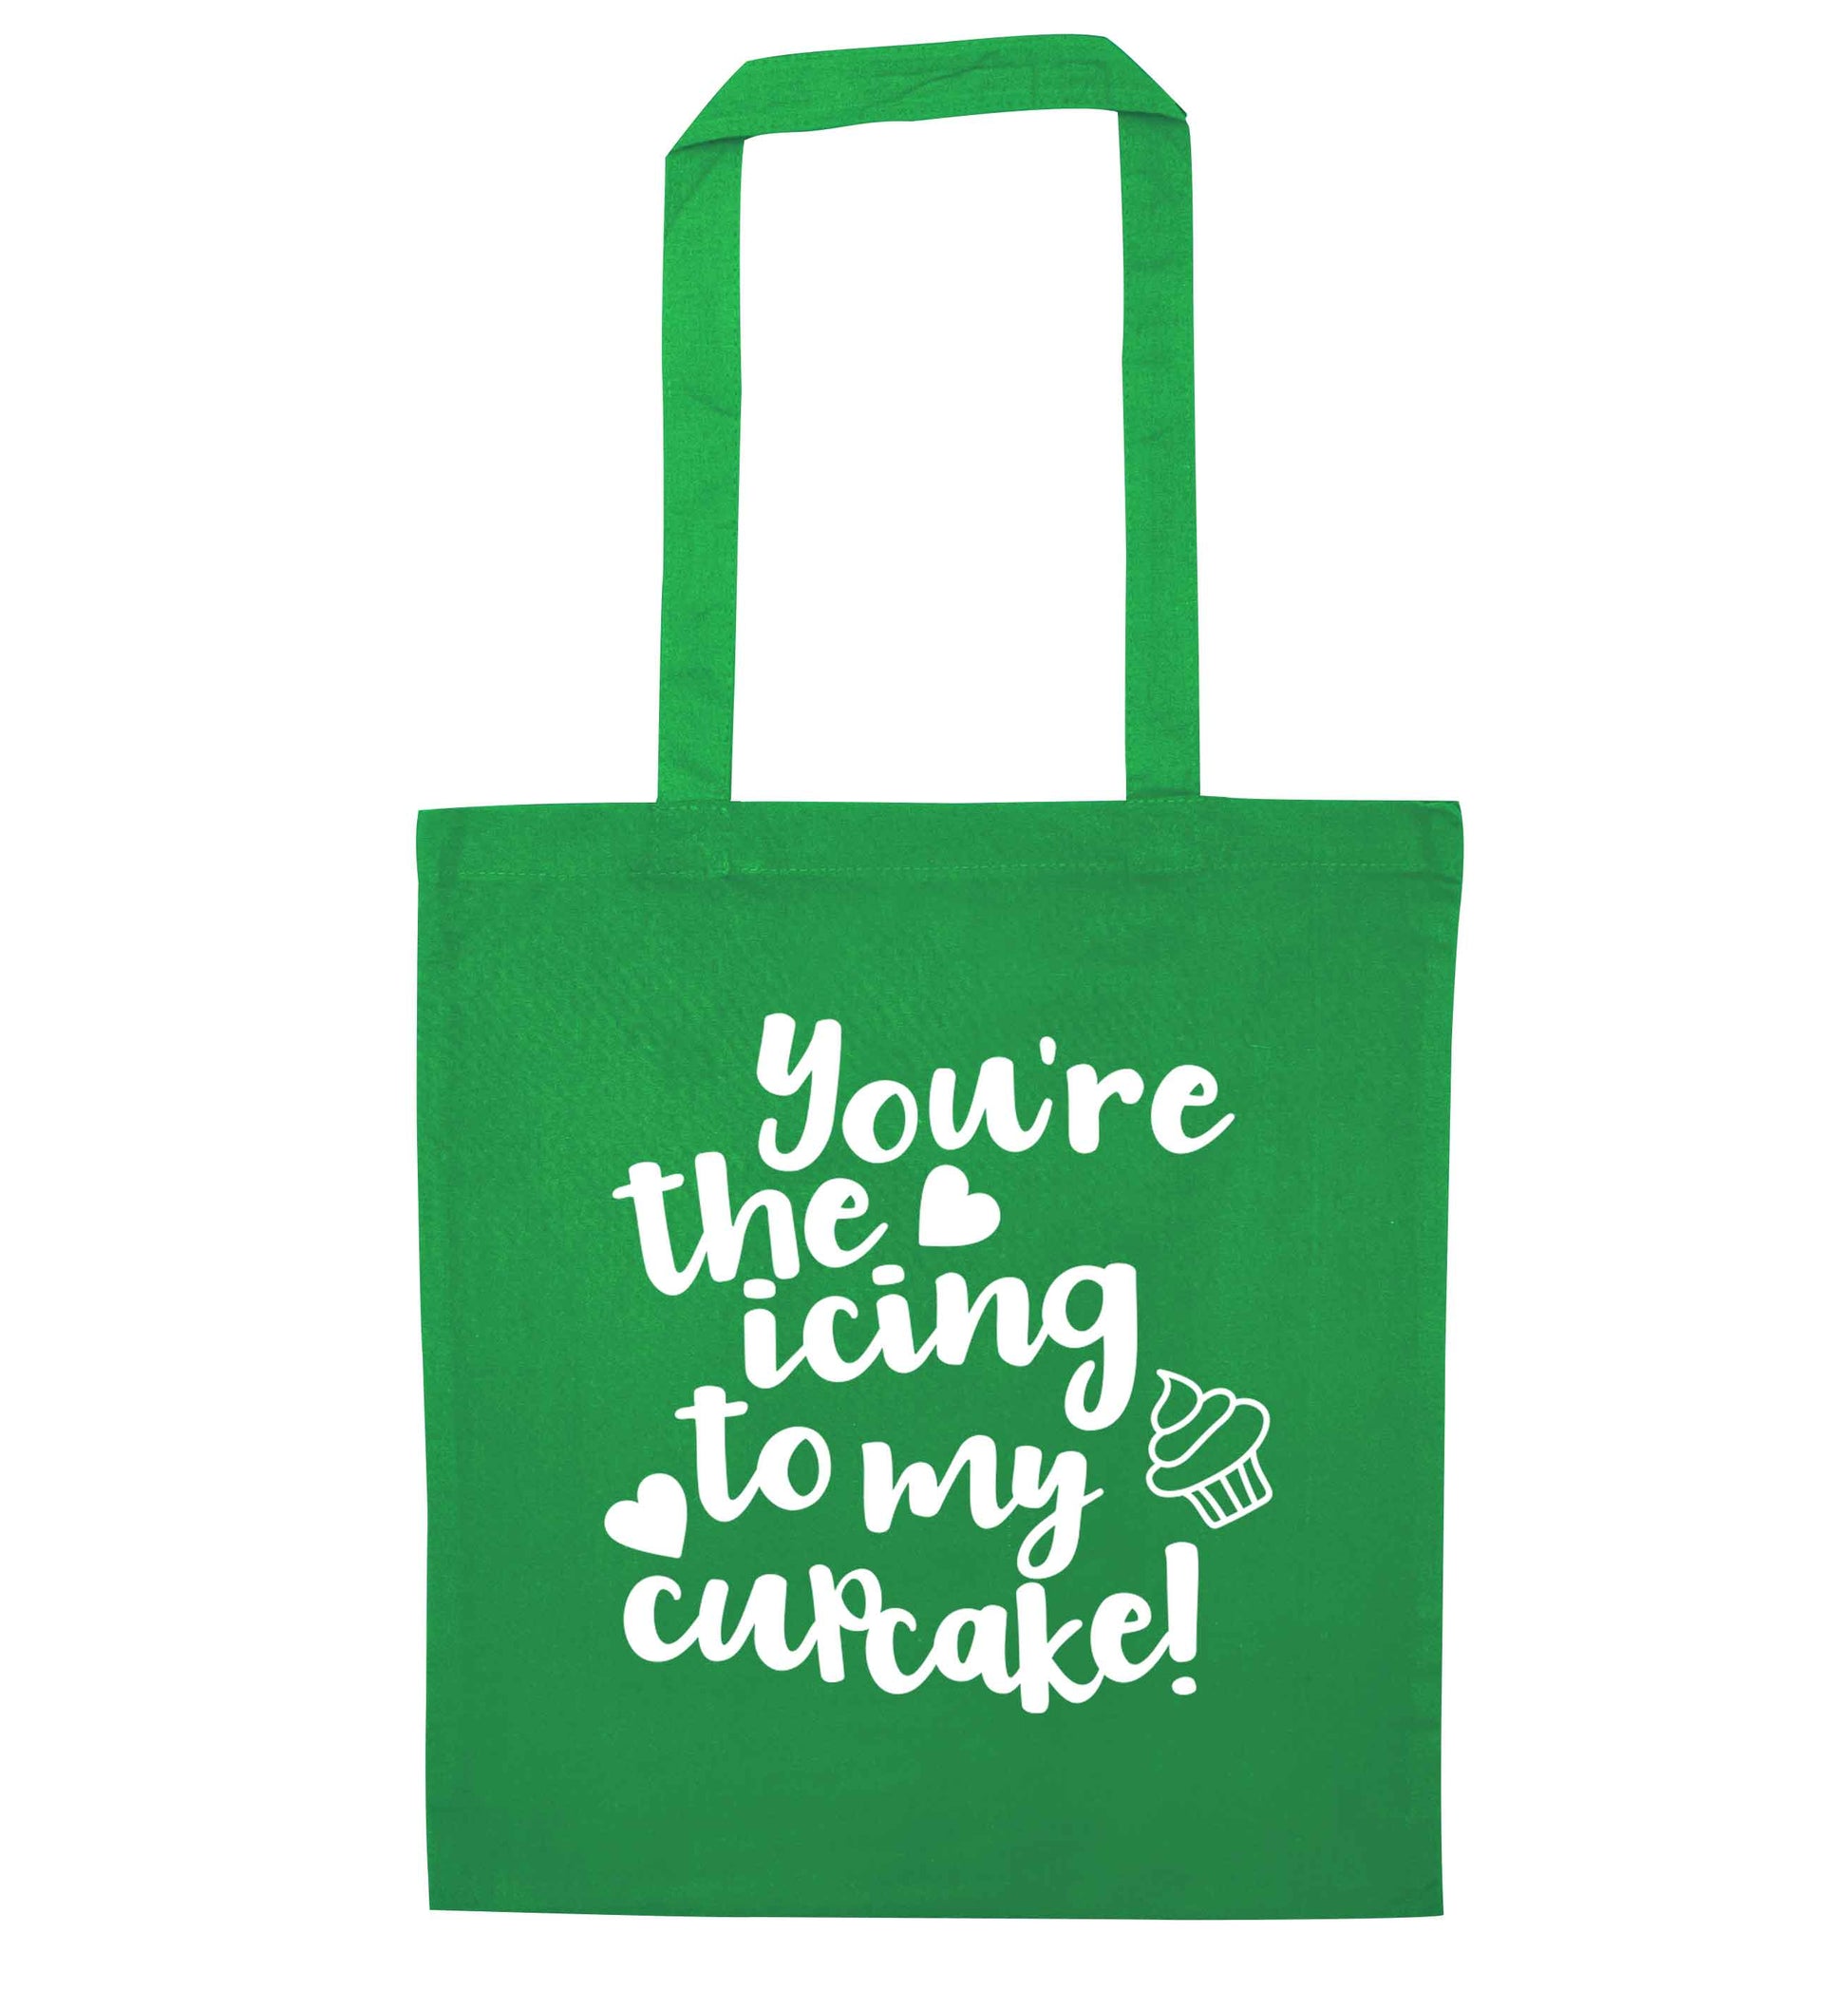 You're the icing to my cupcake green tote bag